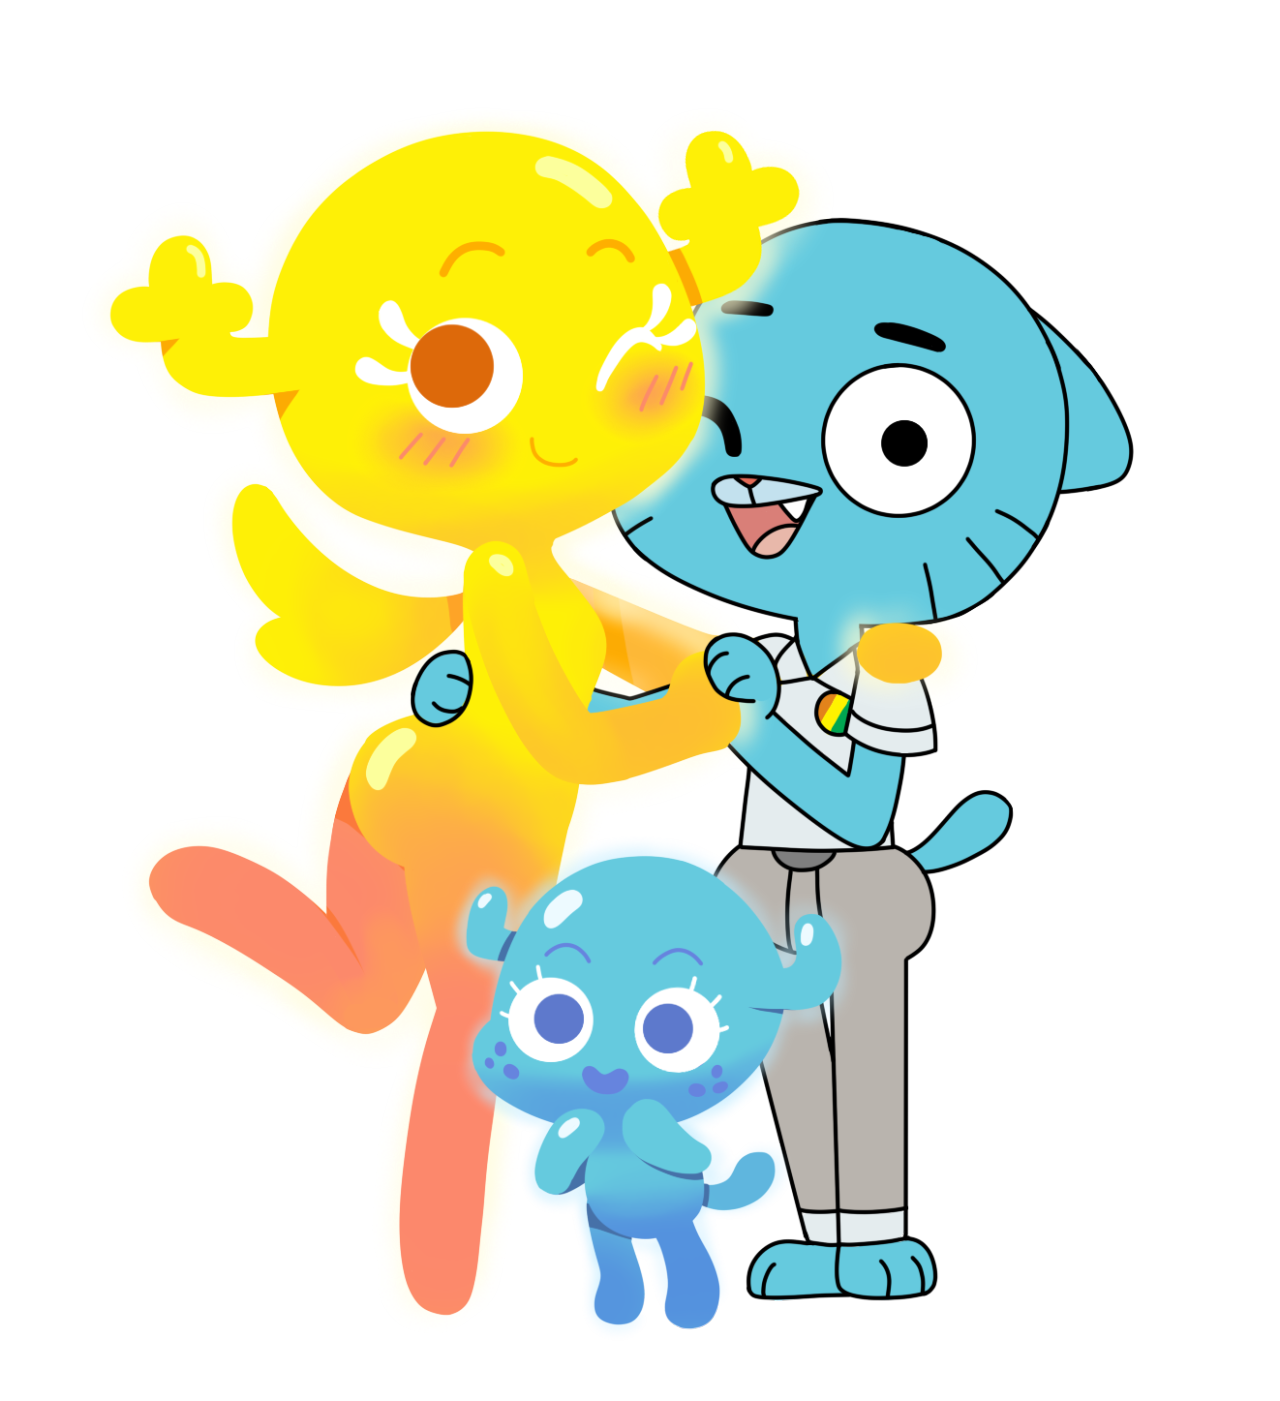 Tawog — I Like This Picture Of Gumball And Penny Gumball